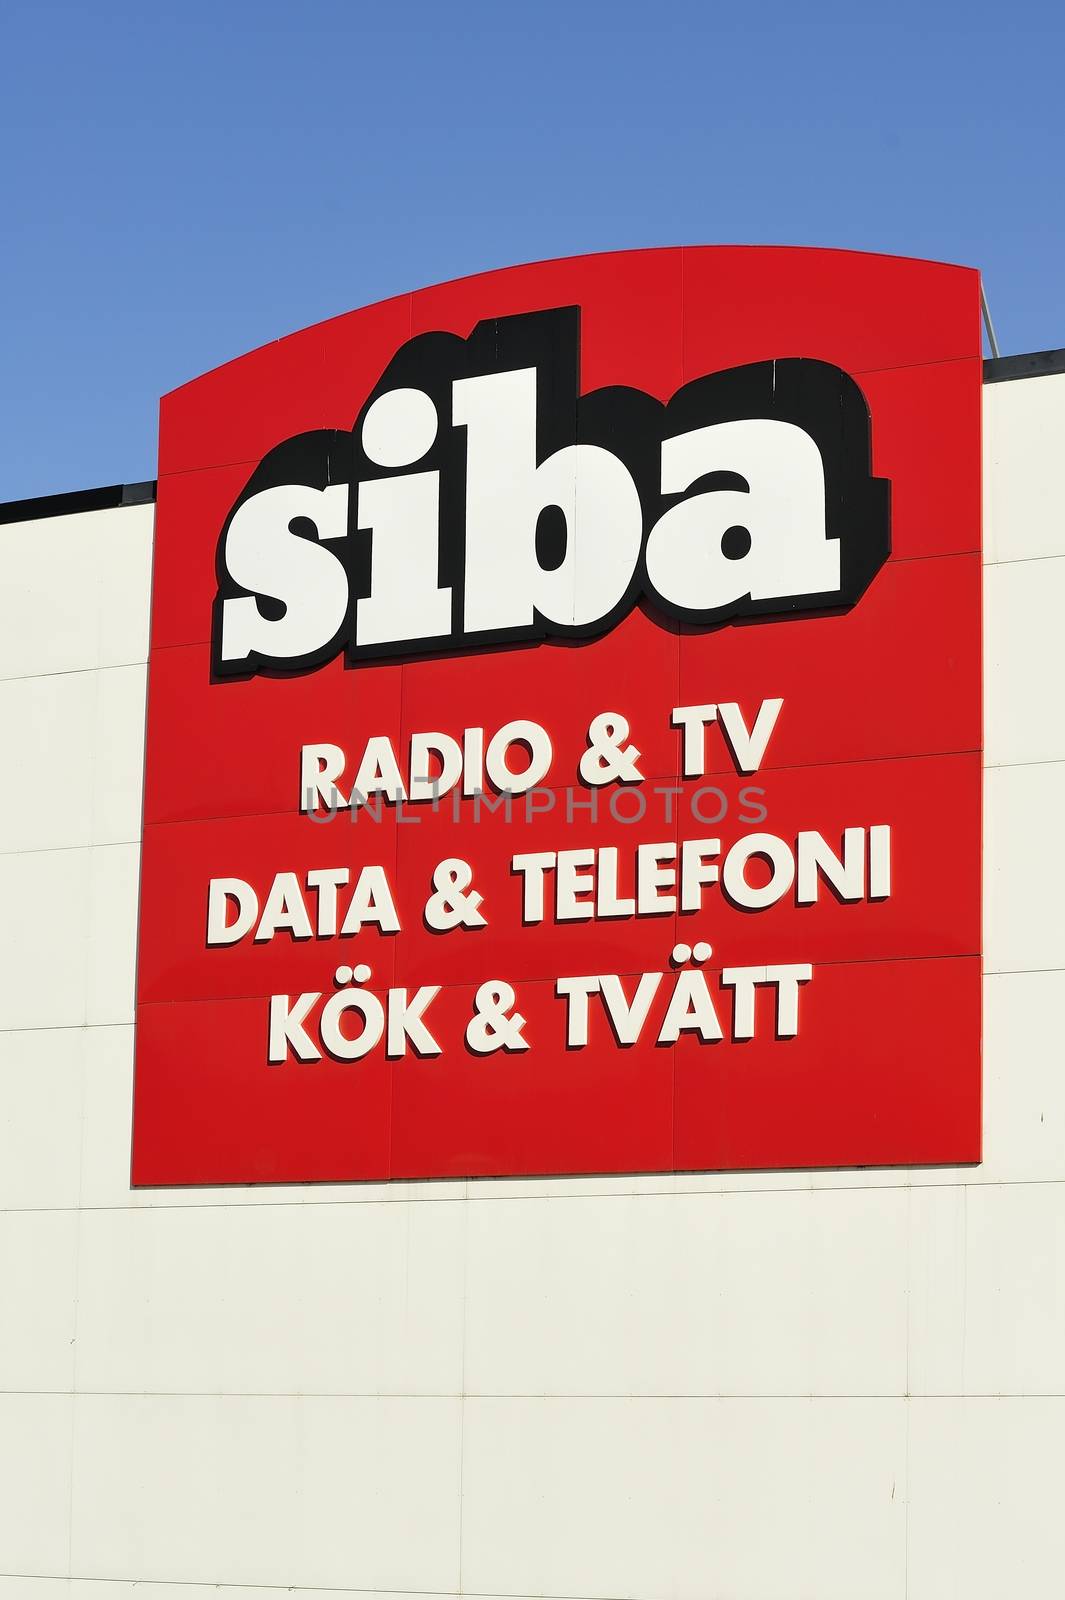 STOCKHOLM - MAY 1 2013: Siba logo sign on showroom premises photographed on may 1th 2013 in Stockholm, Sweden.